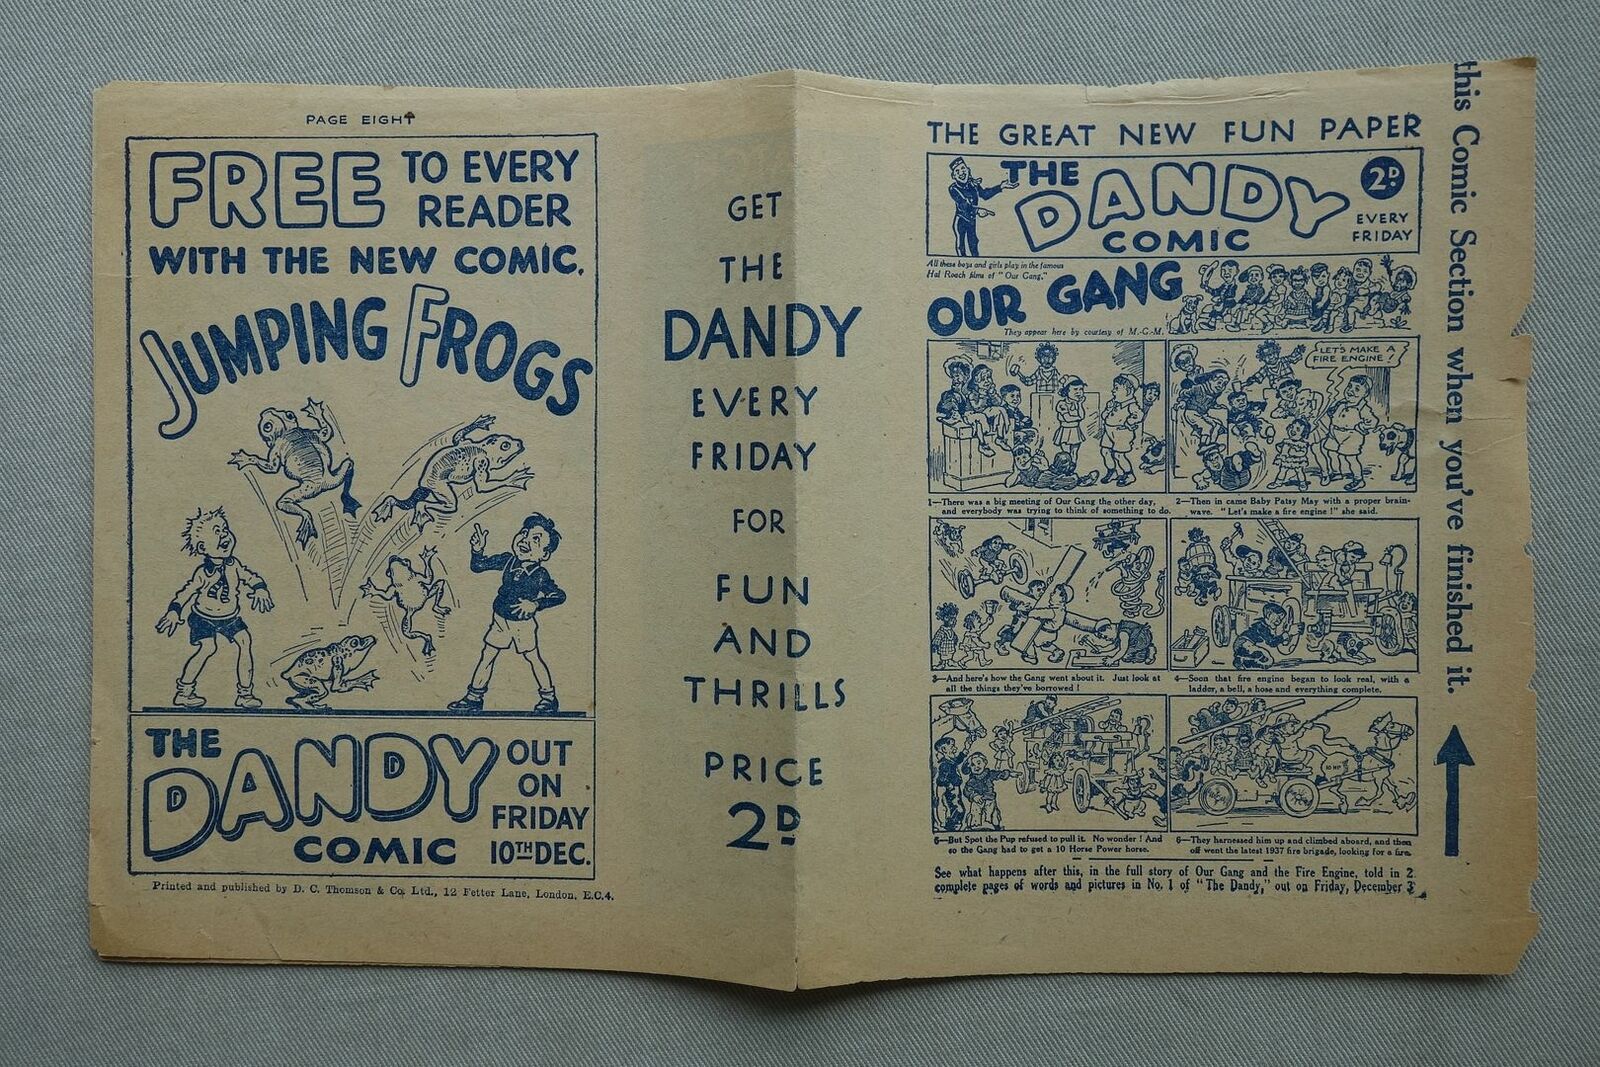 A very rare preview promotion for the first issue of The Dandy